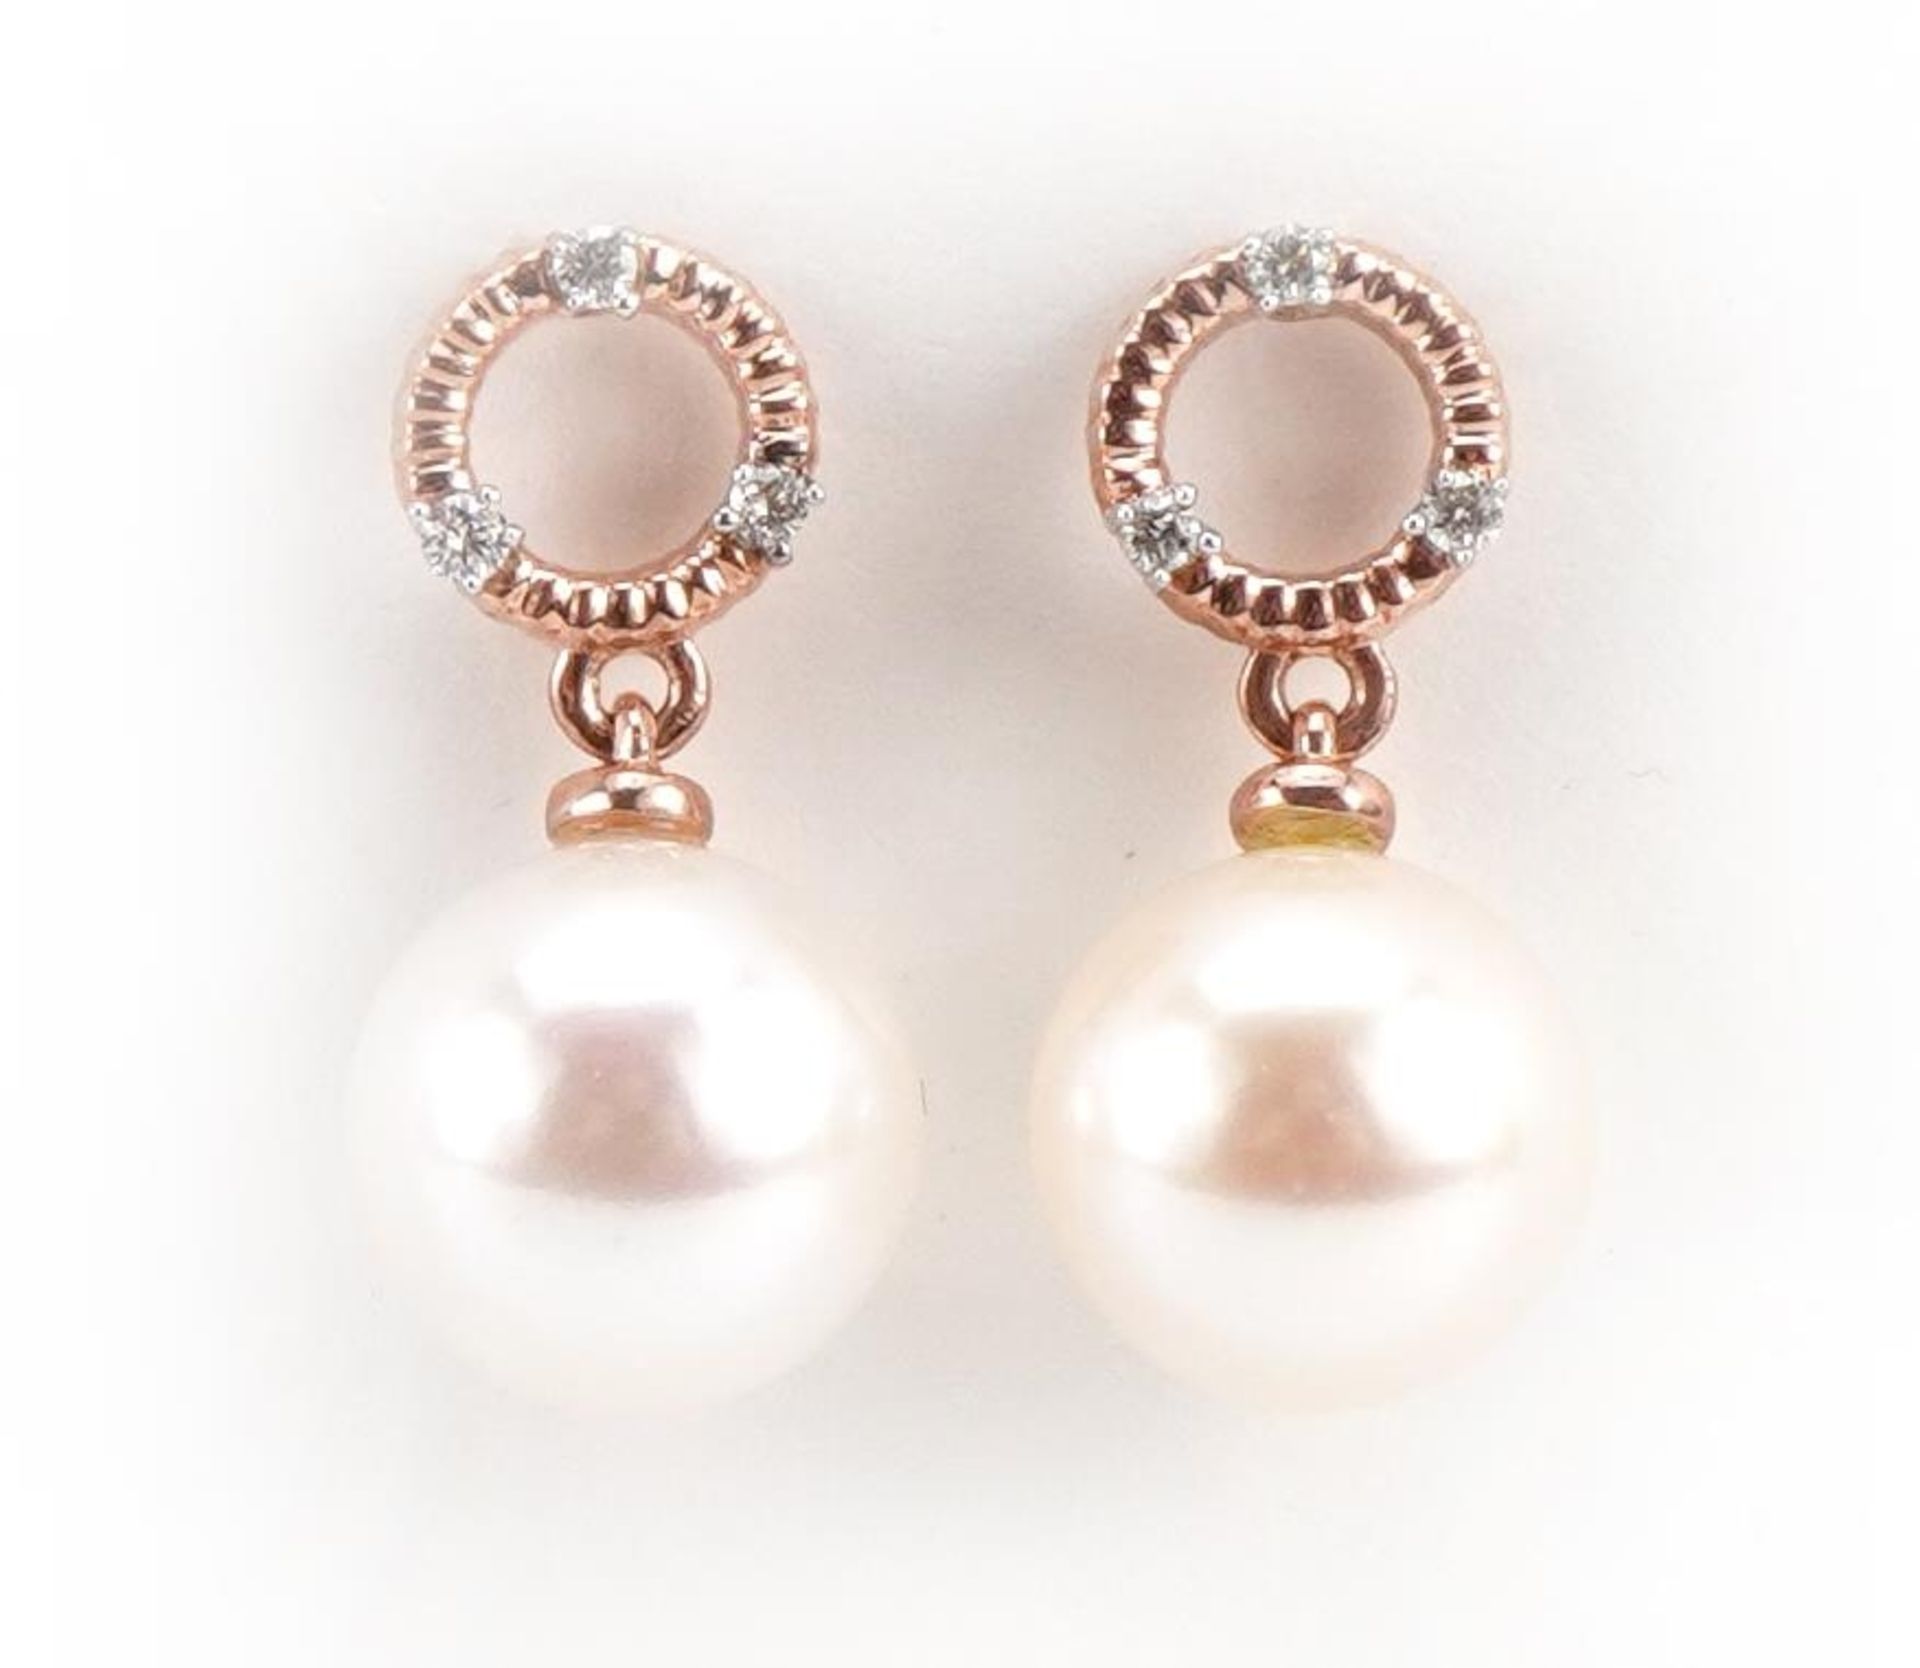 Pair of 9ct rose gold pearl drop earrings, each set with three diamonds, total diamond weight